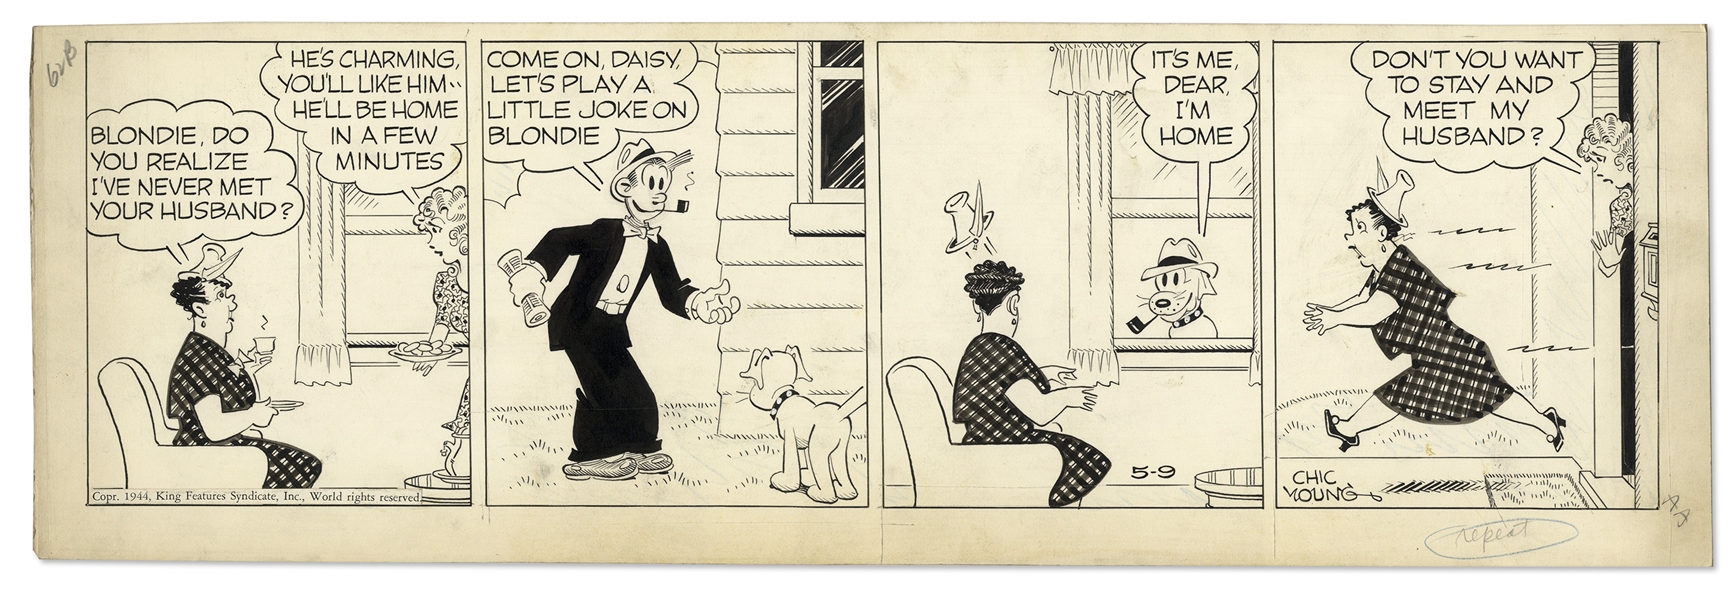 Chic Young Hand-Drawn ''Blondie'' Comic Strip From 1944 Featuring Blondie -- Titled, ''It's The Beast in Him''